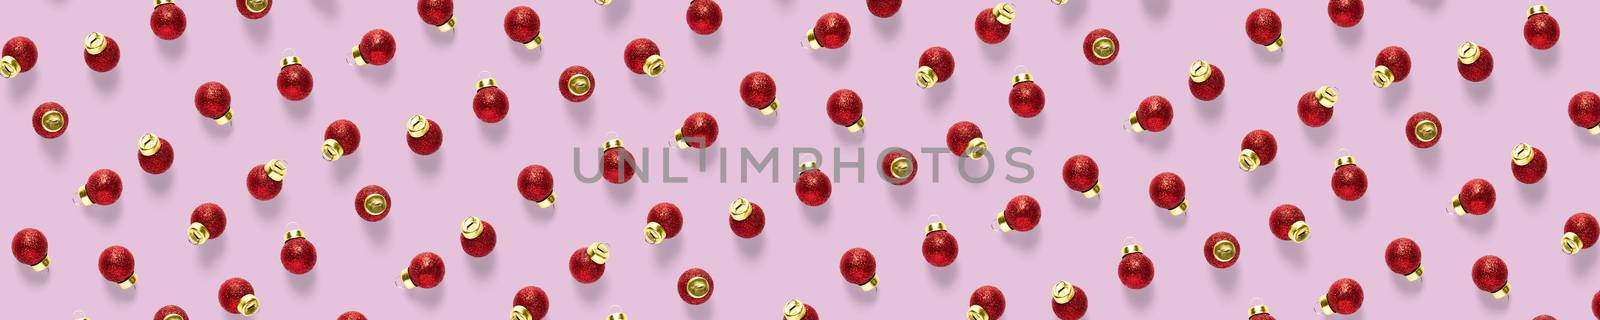 Christmas red decorations on pink background. Christmas ornaments composition for background. Flat lay of red ornaments by PhotoTime